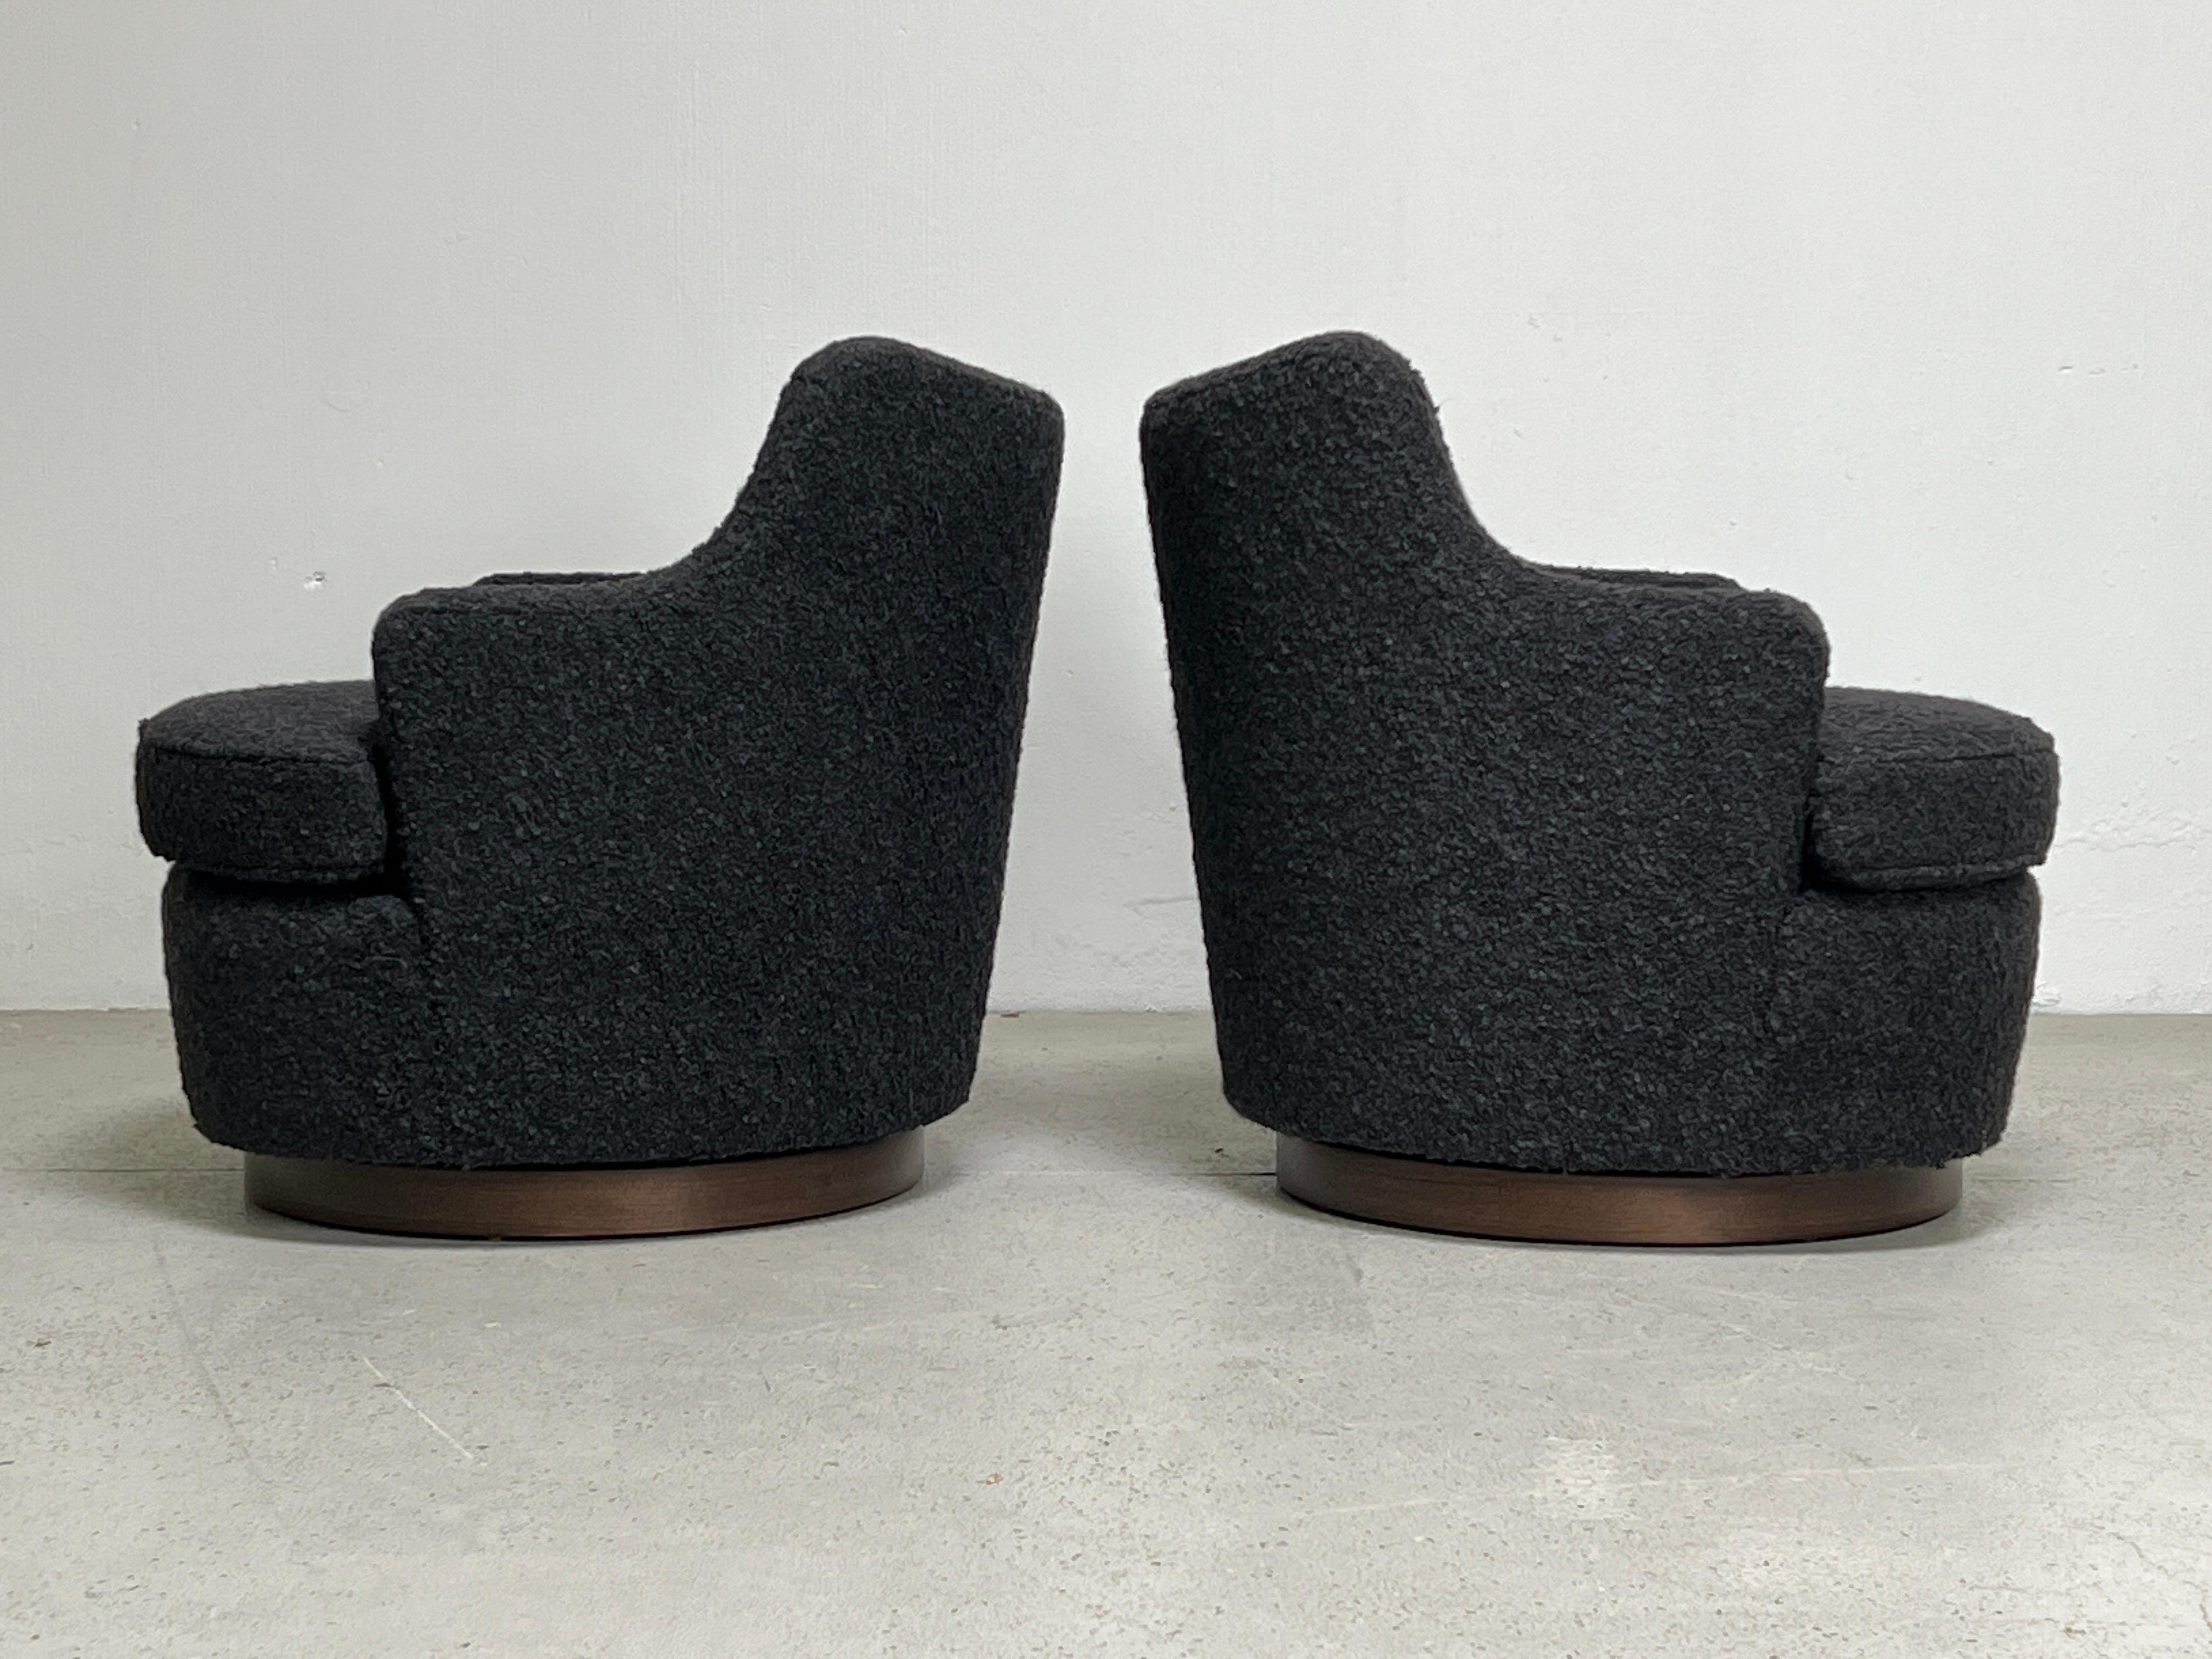 A pair of dunbar swivel chairs designed by Edward Wormley with walnut bases. Newly upholstered in holly hunt / teddy / charcoal fabric.